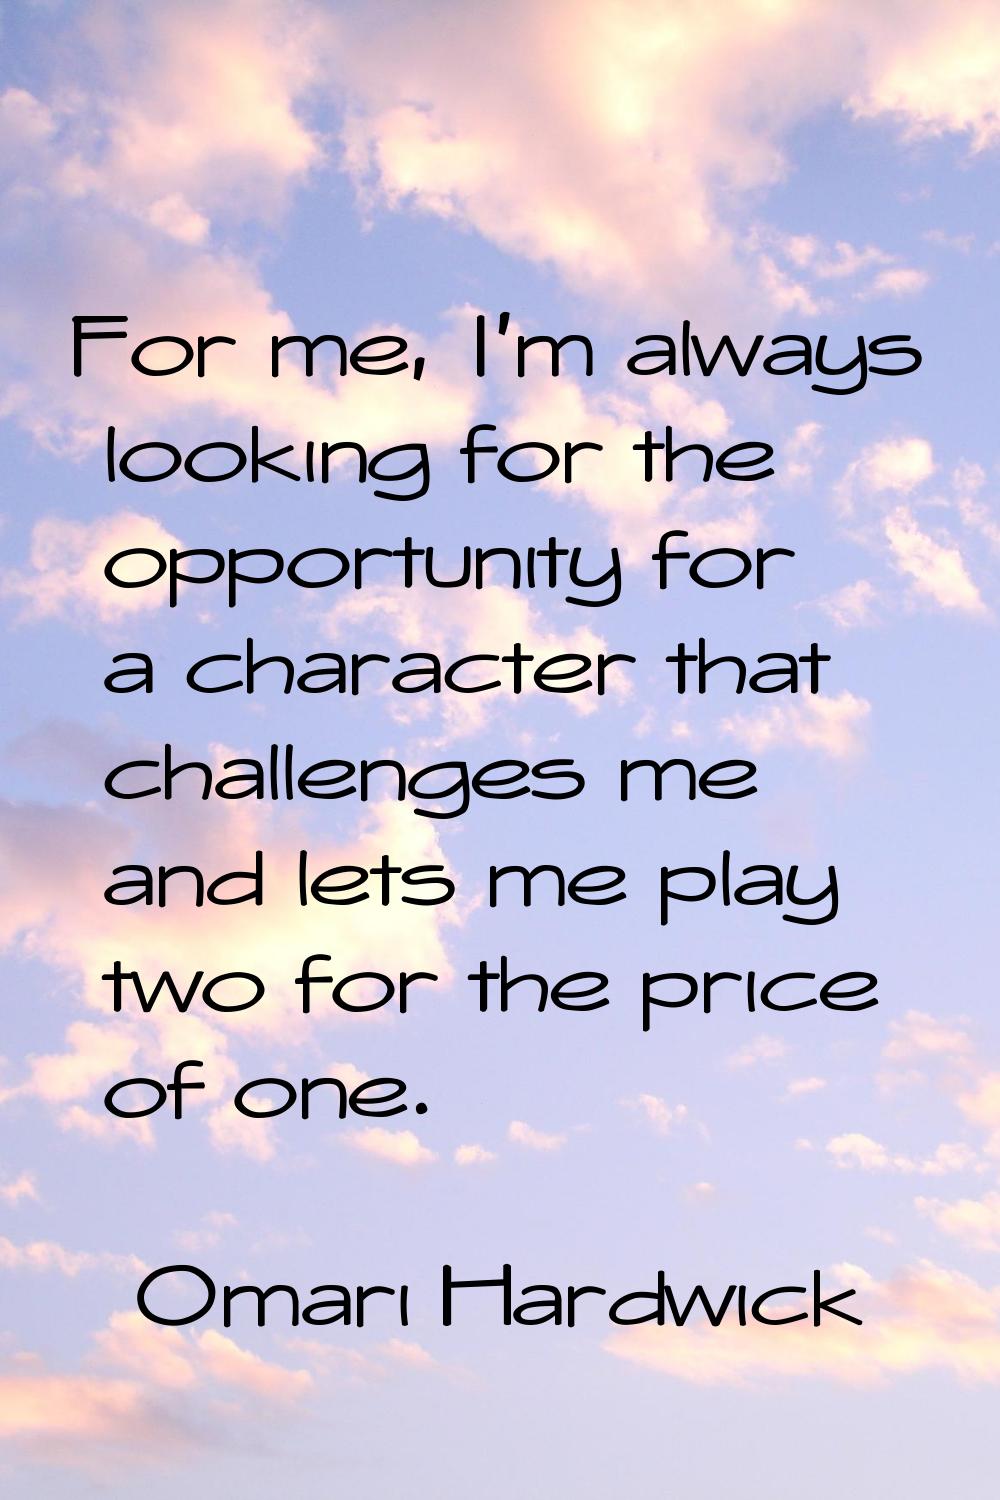 For me, I'm always looking for the opportunity for a character that challenges me and lets me play 